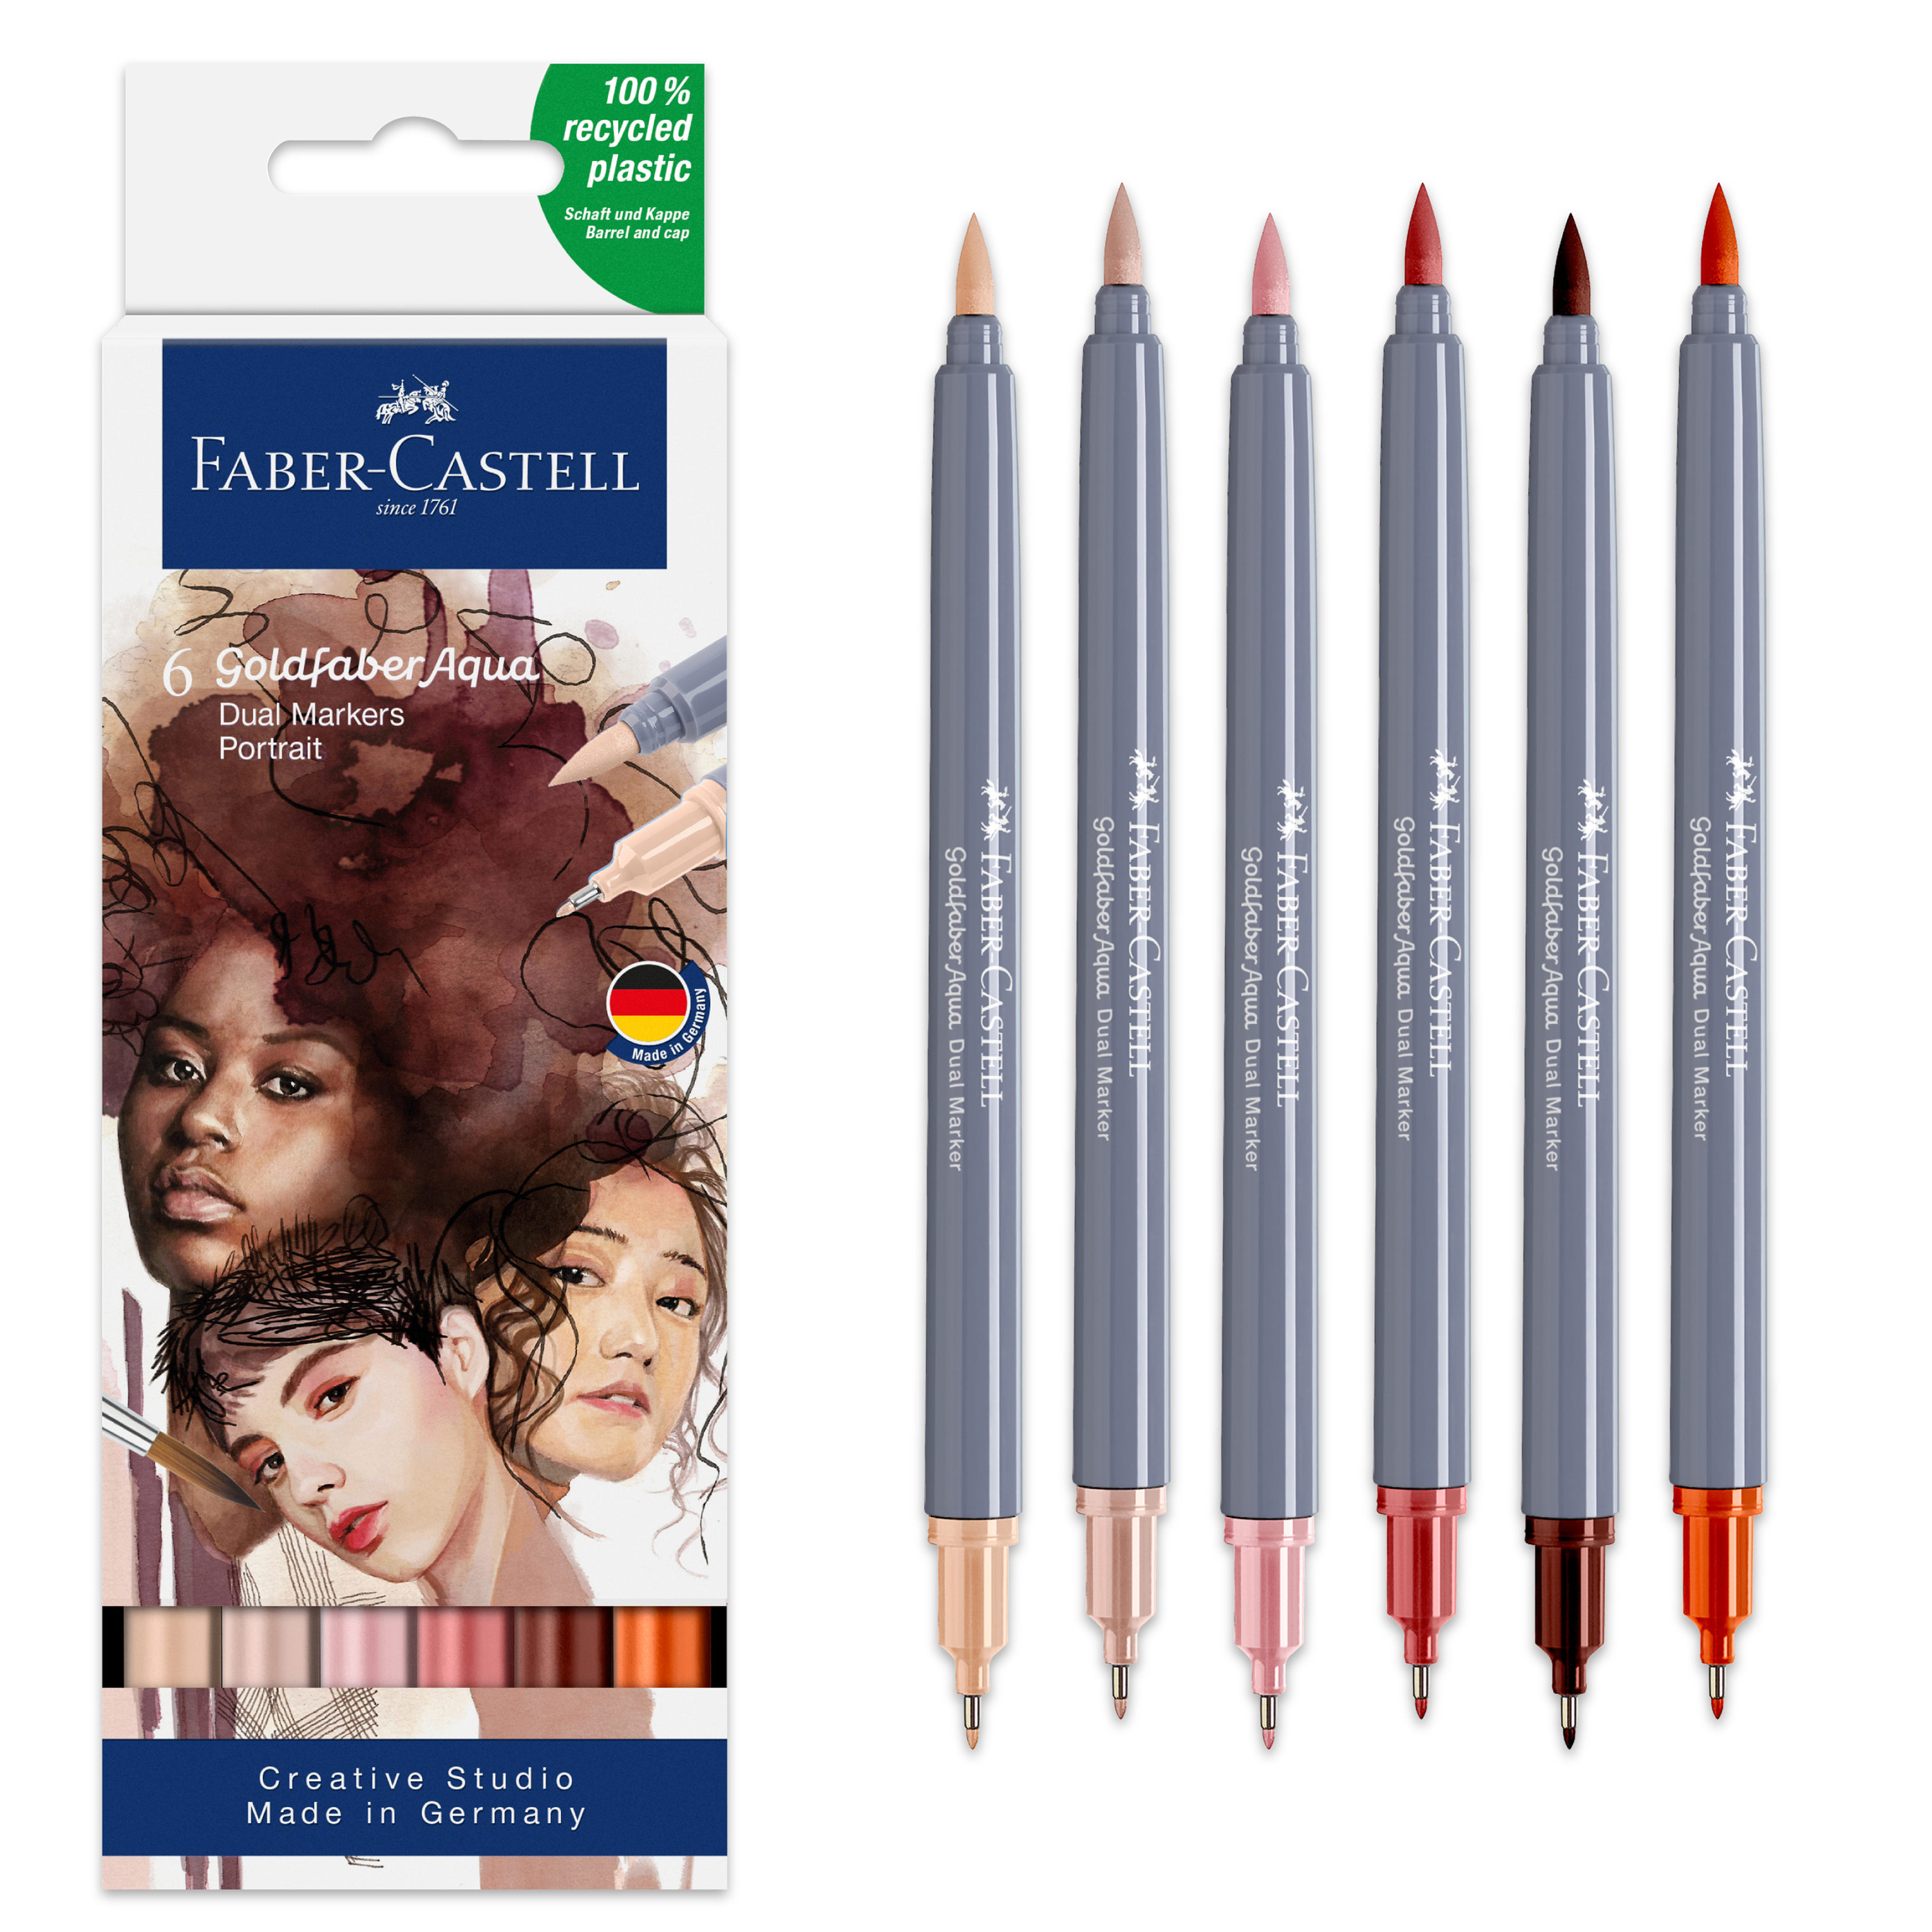 21 in 1 Watercolor Brush Pens Set Premium Soft Flexible Tip- Water Coloring  Marker for Fine & Broad Lines,Blend-able,Super Colors for